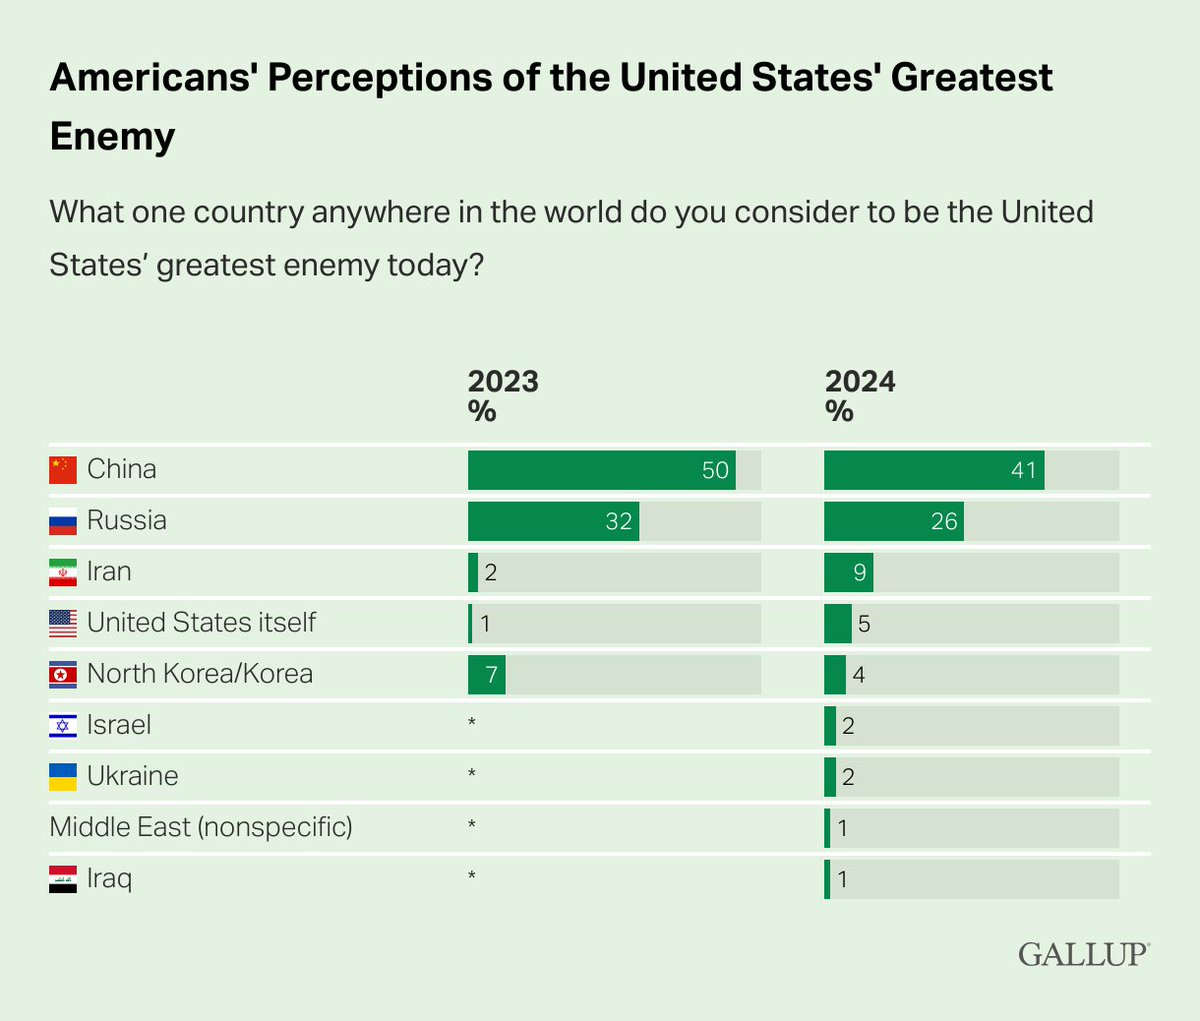 Forty-one percent of Americans name China as the United States’ greatest enemy today.